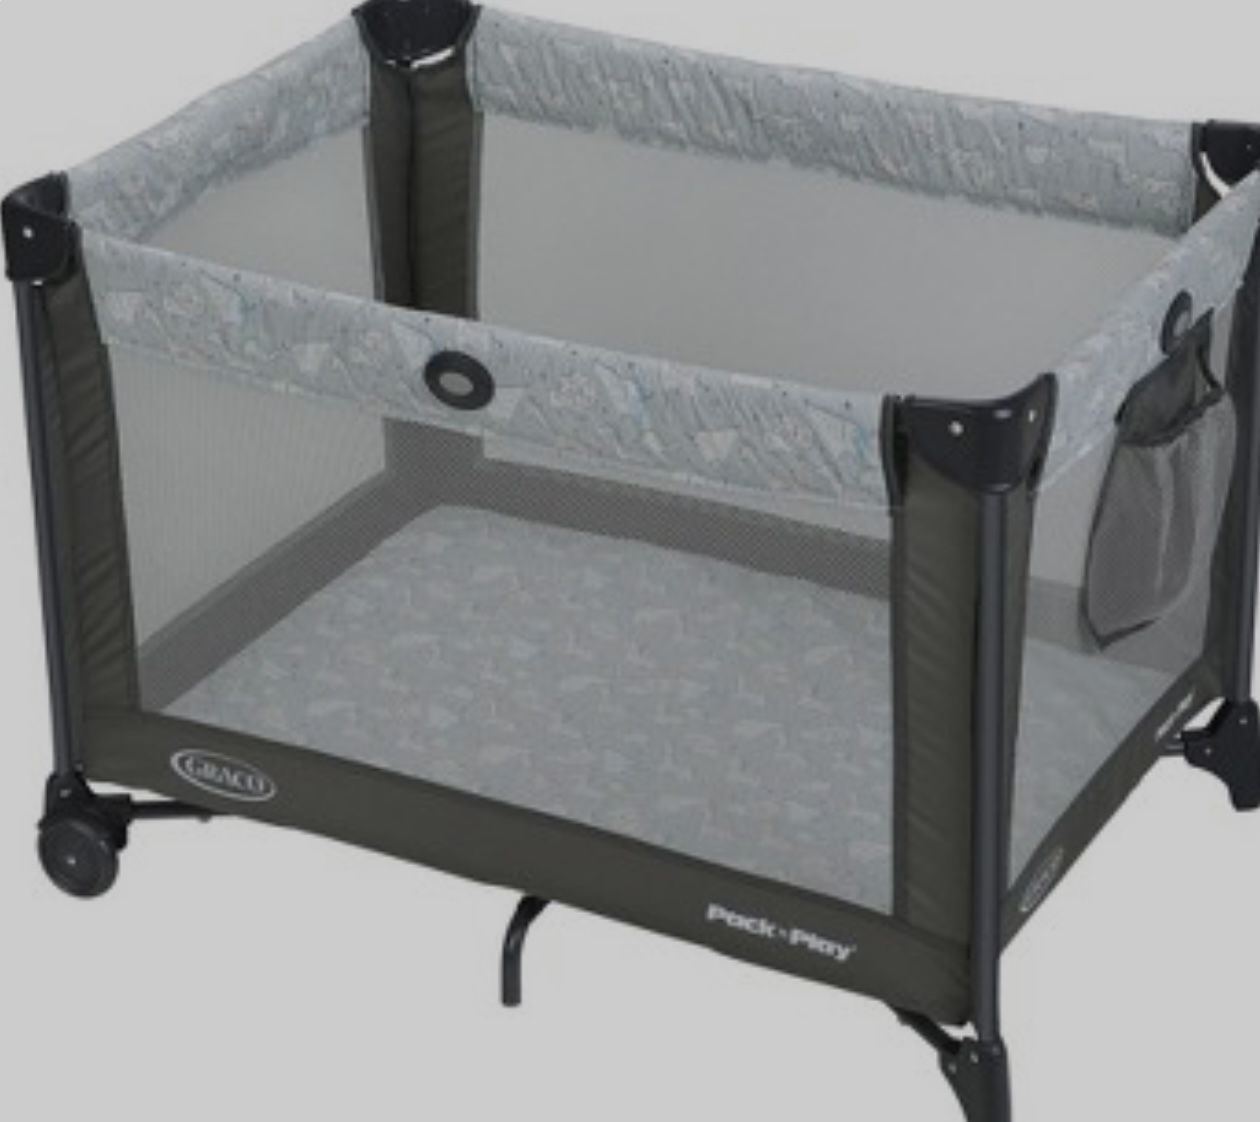 Graco Pack and play